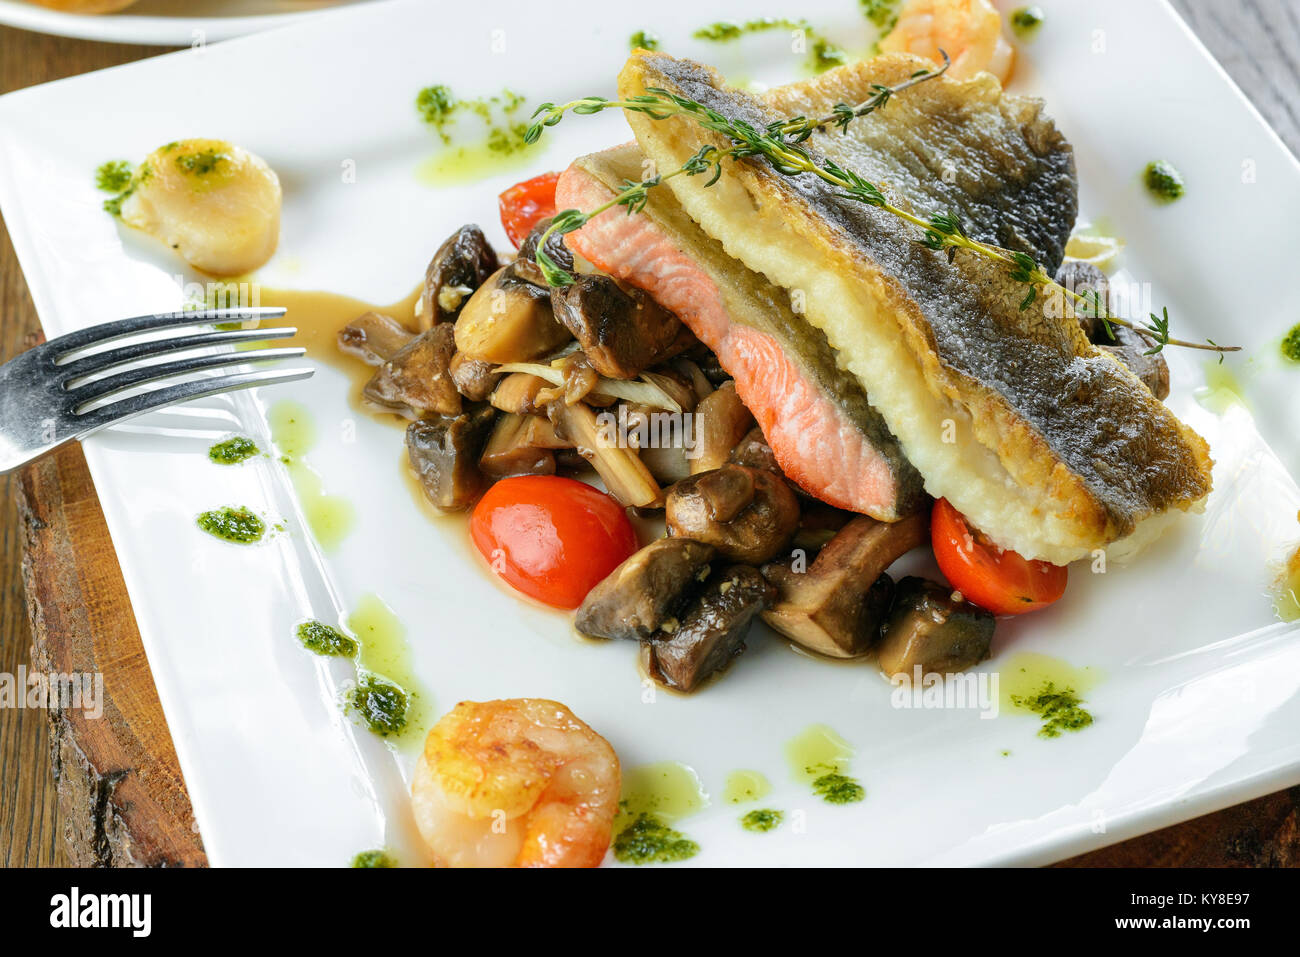 Roasted salmon with mushrooms and vegetables Stock Photo